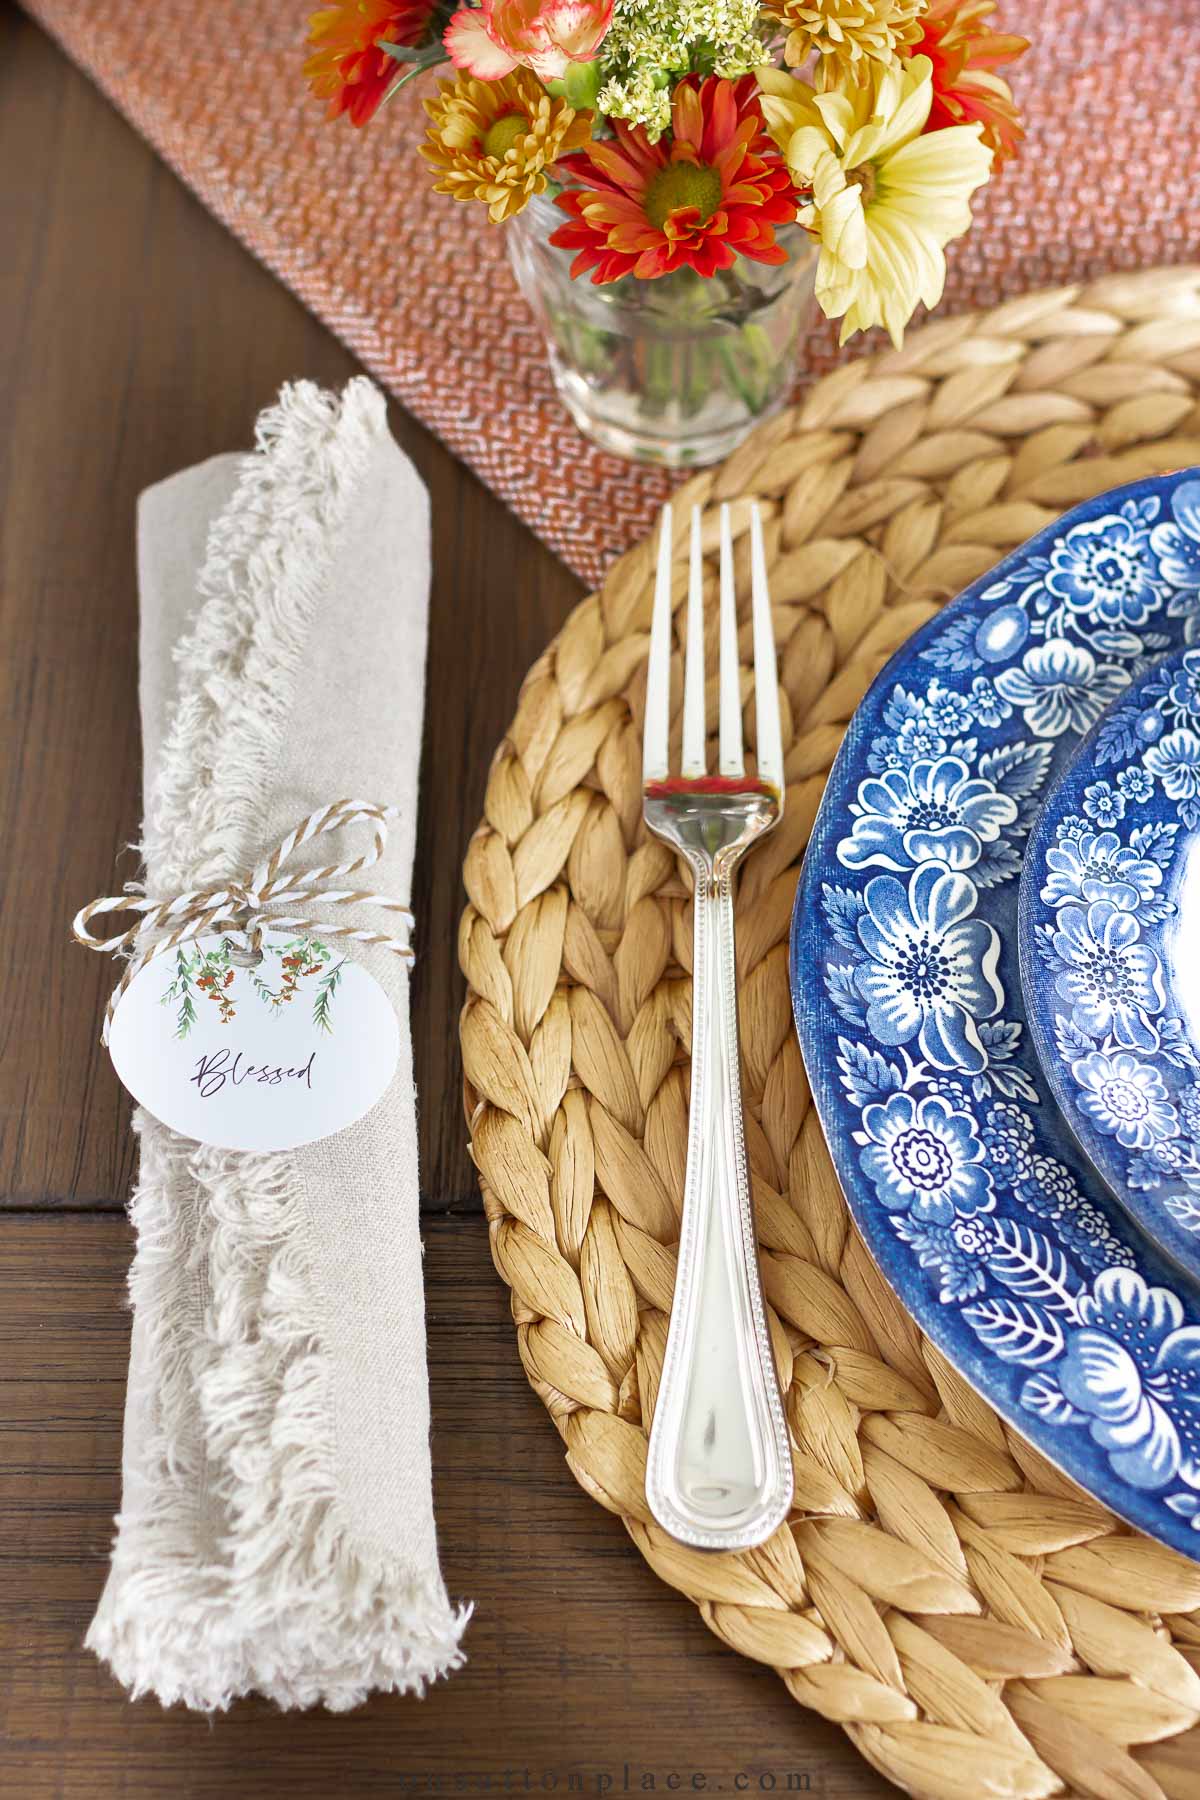 https://www.onsuttonplace.com/wp-content/uploads/2022/10/place-setting-with-cloth-dinner-napkin-and-liberty-blue-plates.jpg